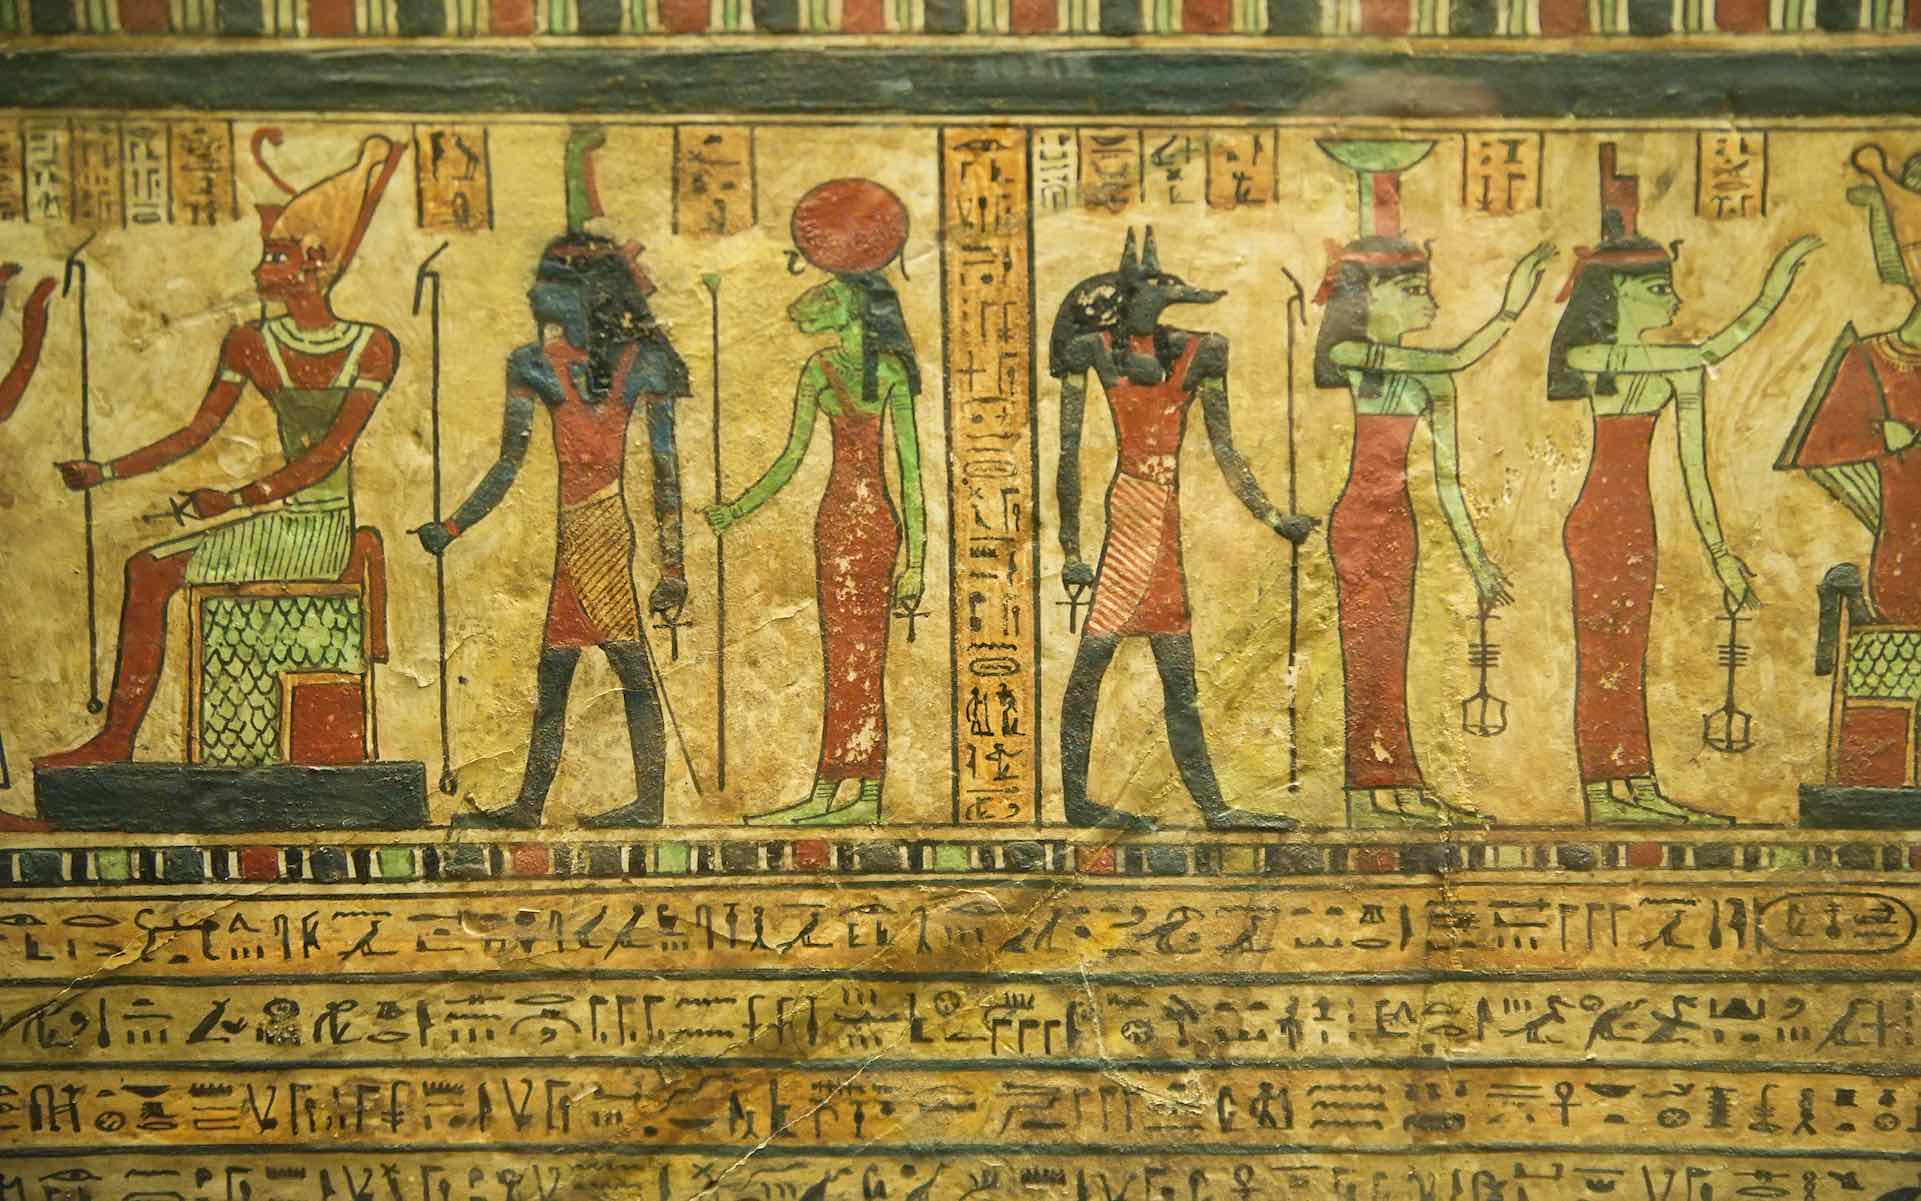 Did women use cannabis as medicine in ancient Egypt?